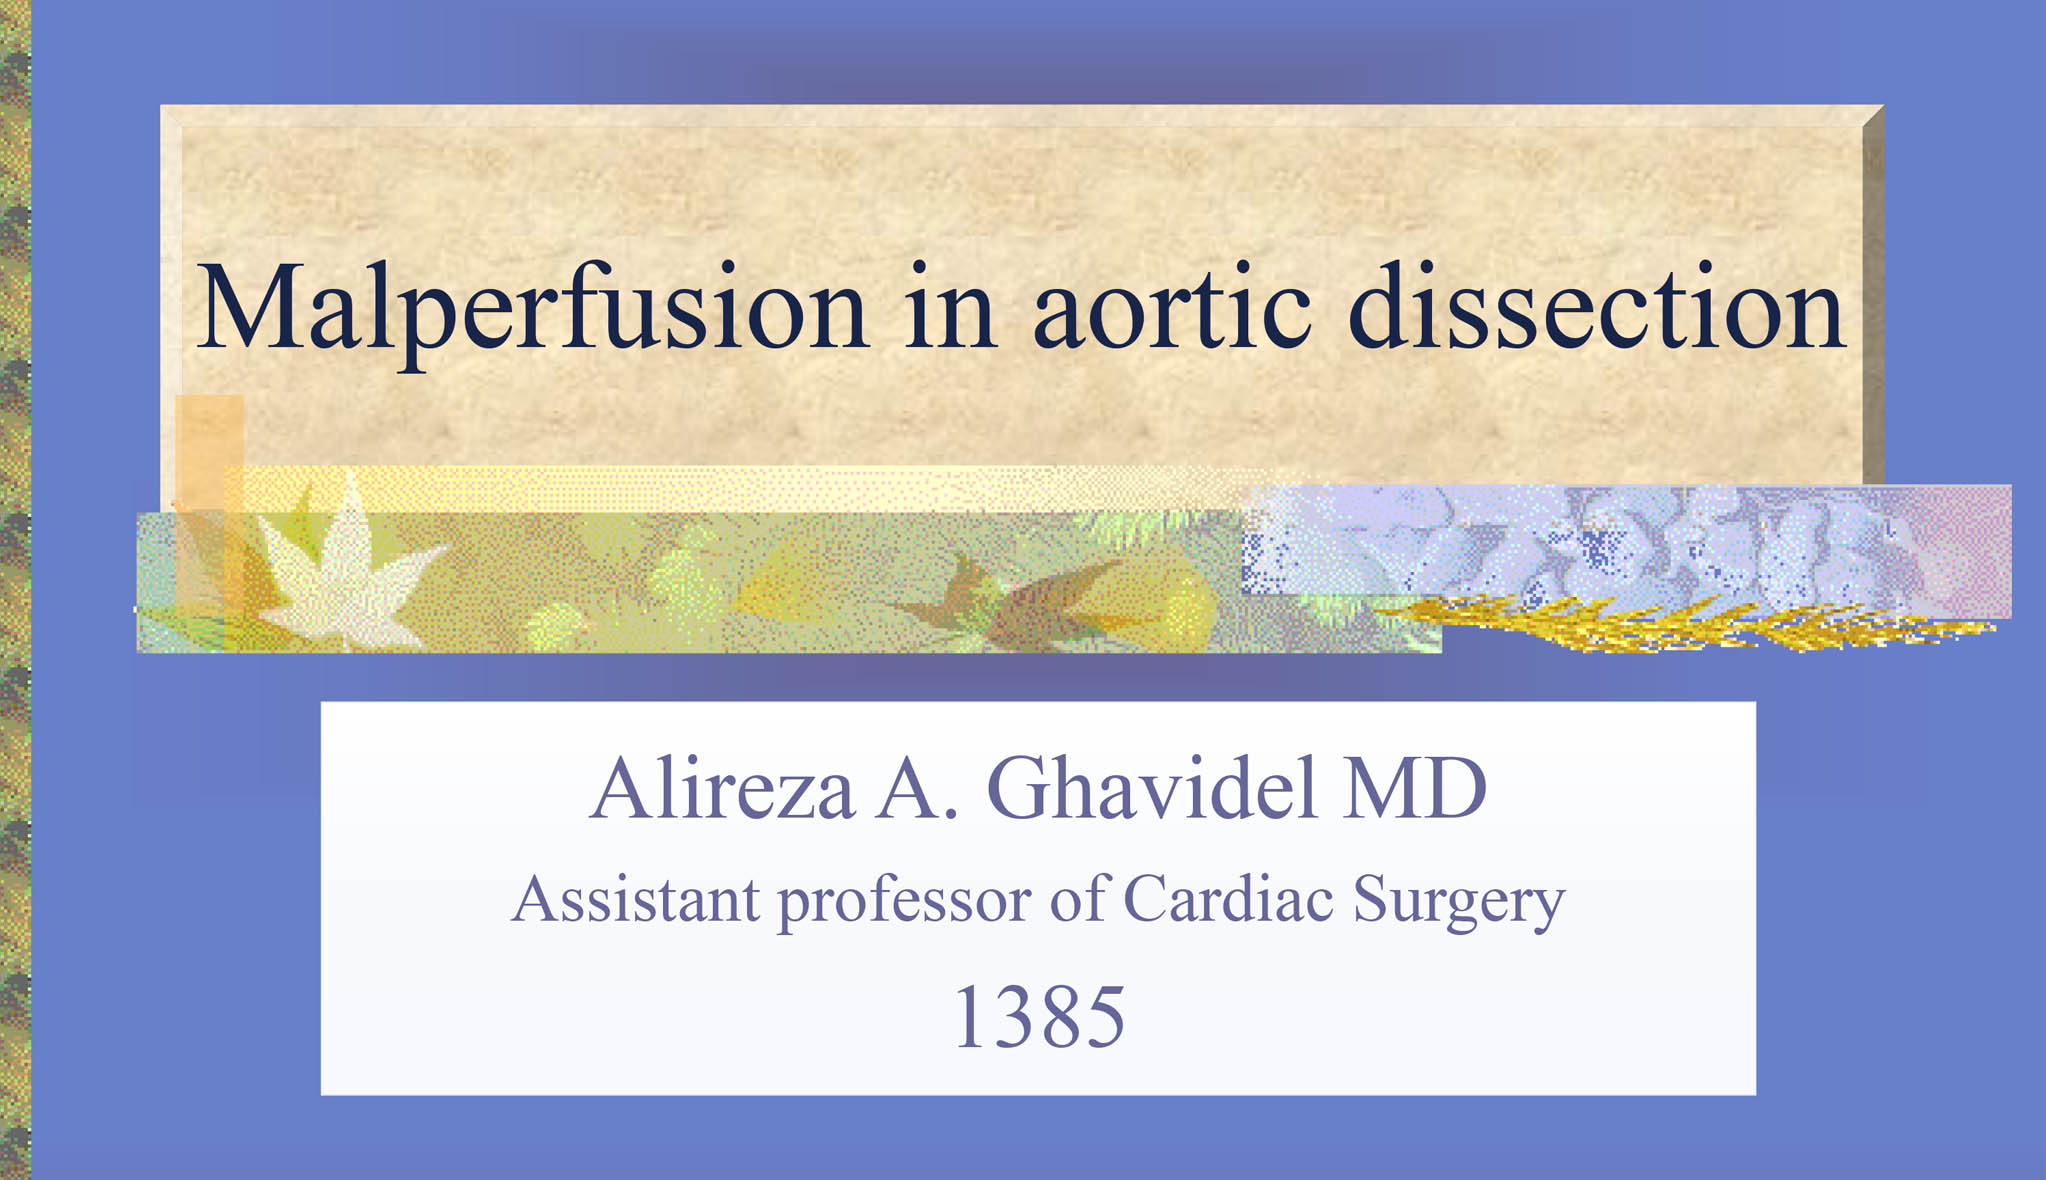 Malperfusion in aortic dissection